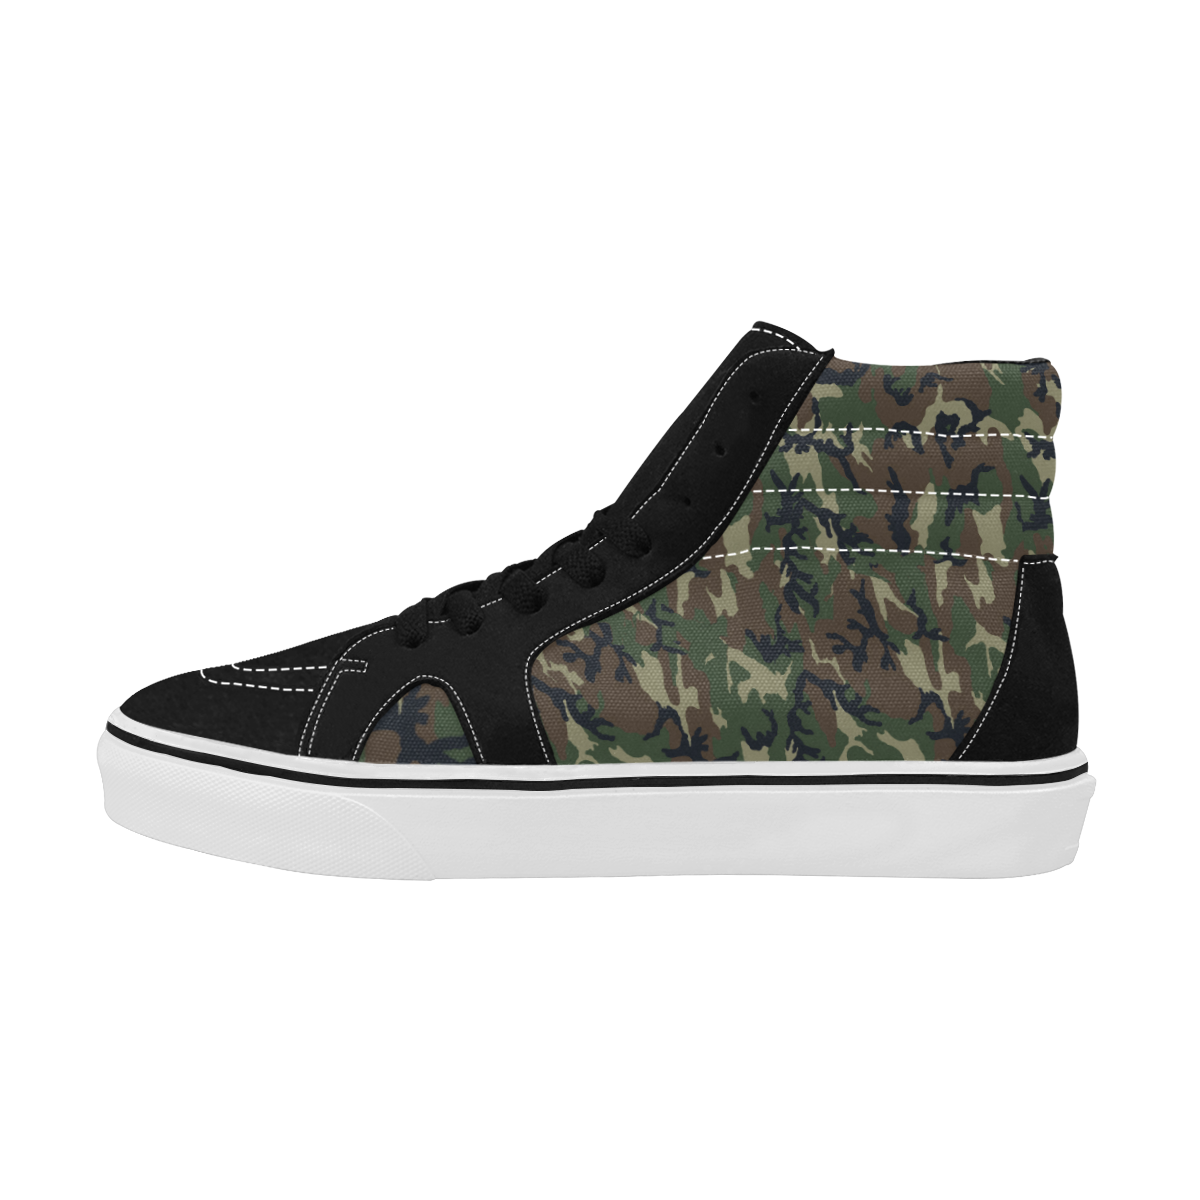 Woodland Forest Green Camouflage Men's High Top Skateboarding Shoes (Model E001-1)